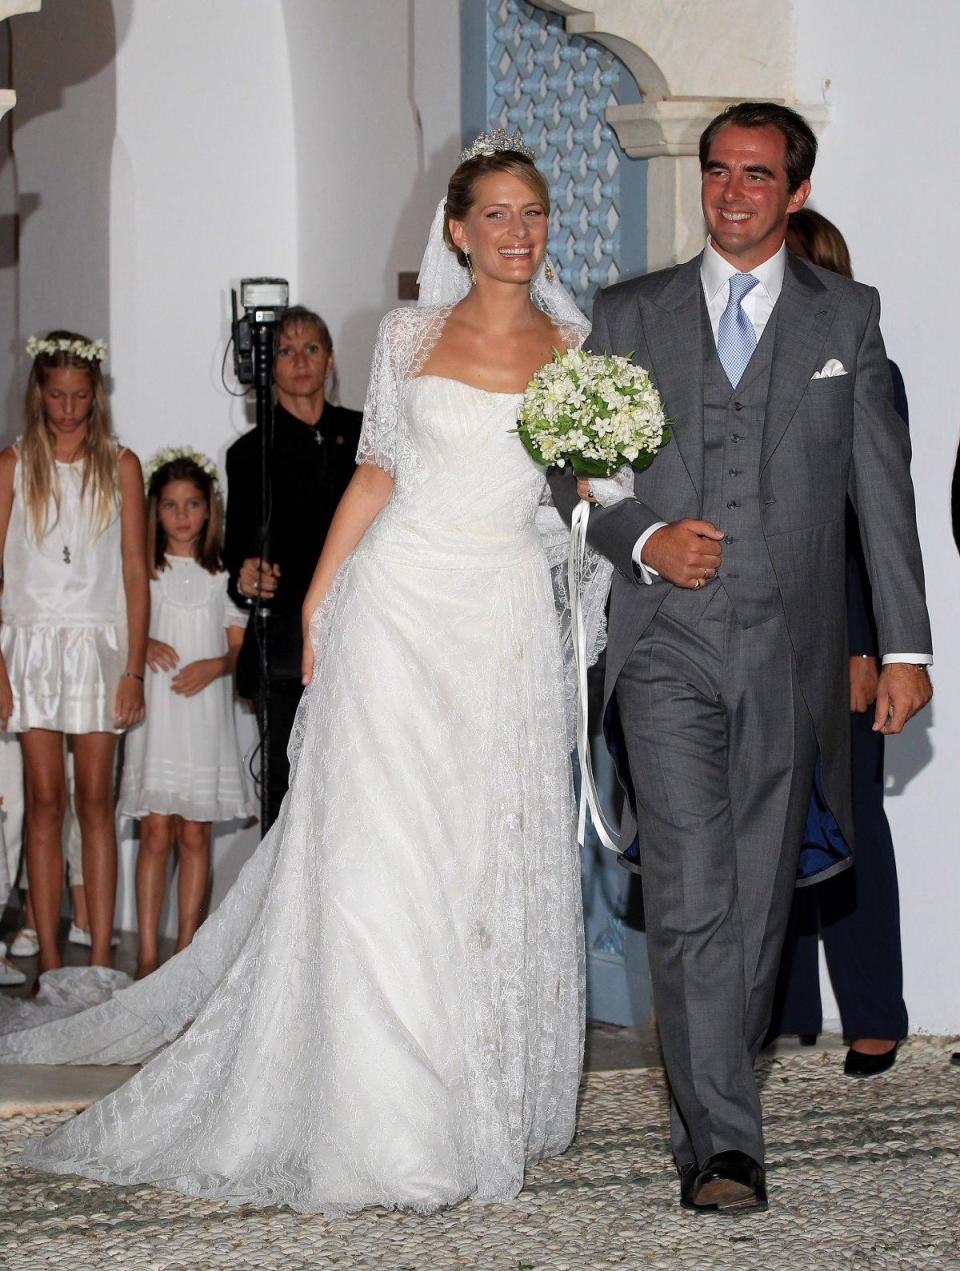 Prince Nikolaos of Greece and Princess Tatiana Blatnik leave after getting married at the Cathedral of Ayios Nikolaos in 2010 in Spetses, Greece. (Chris Jackson/Getty Images)